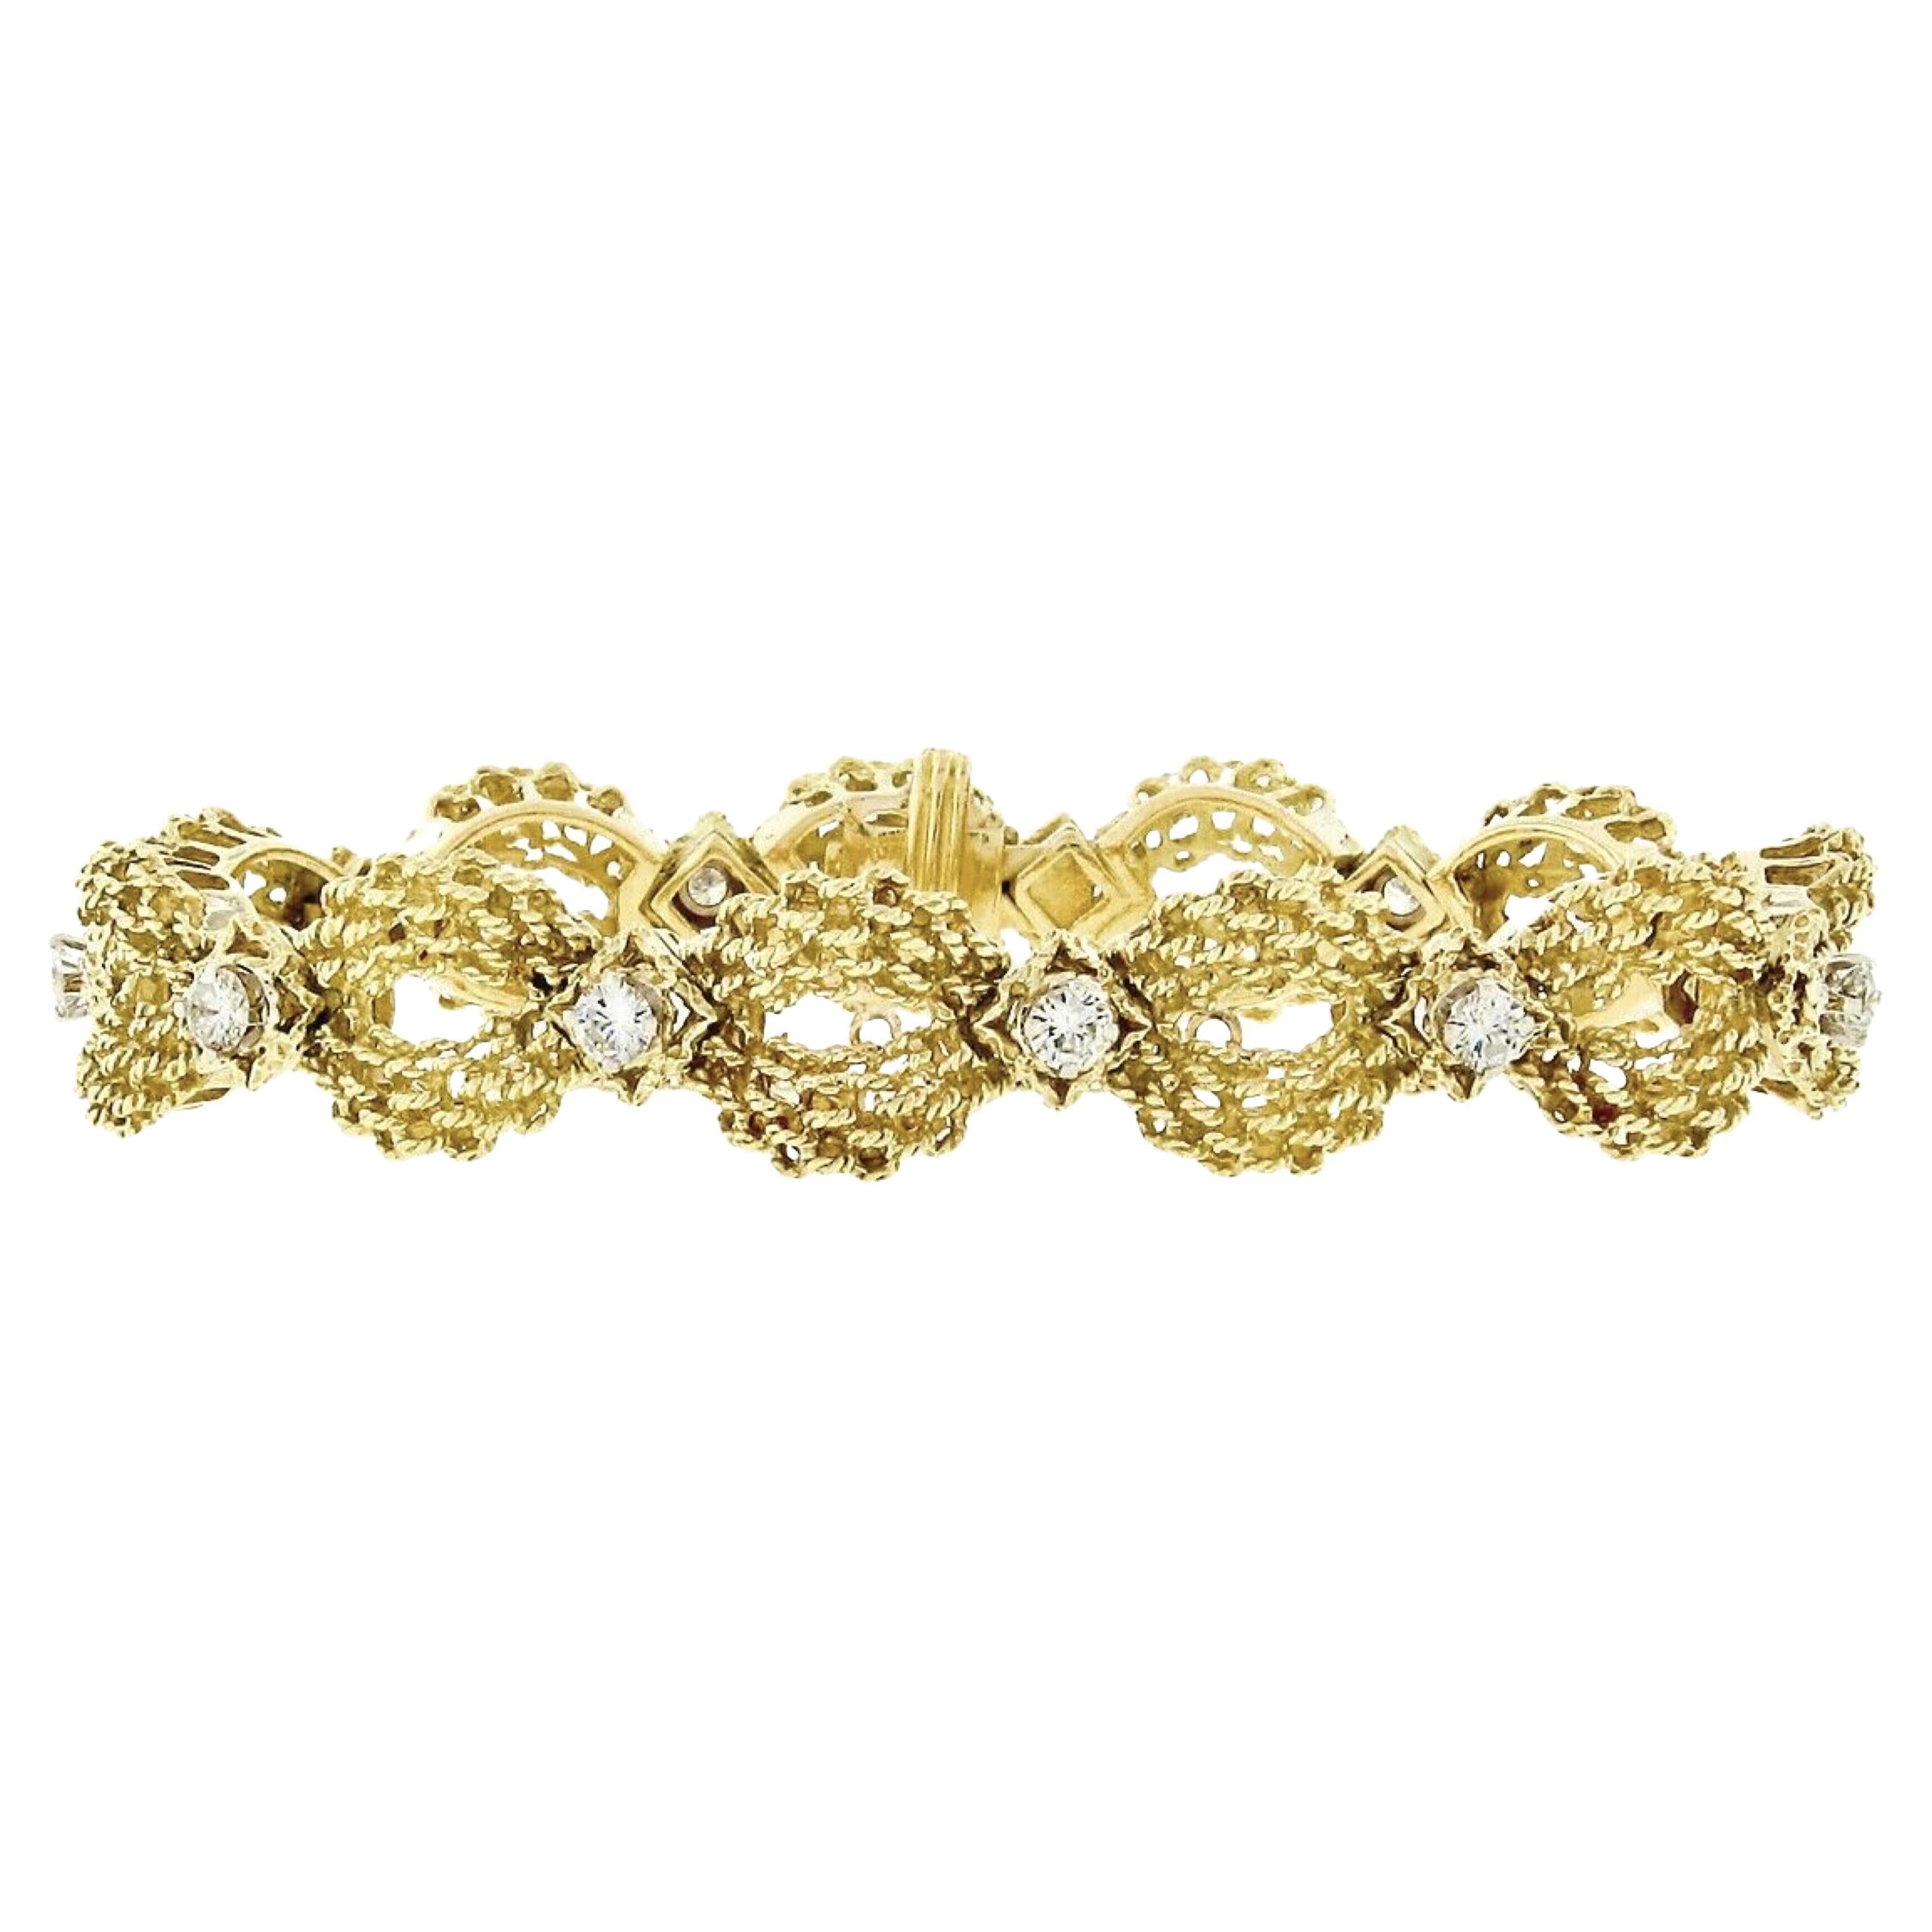 Vintage 18k Gold 1.51ct Diamond Twisted Wire Open Puffed Link Statement Bracelet